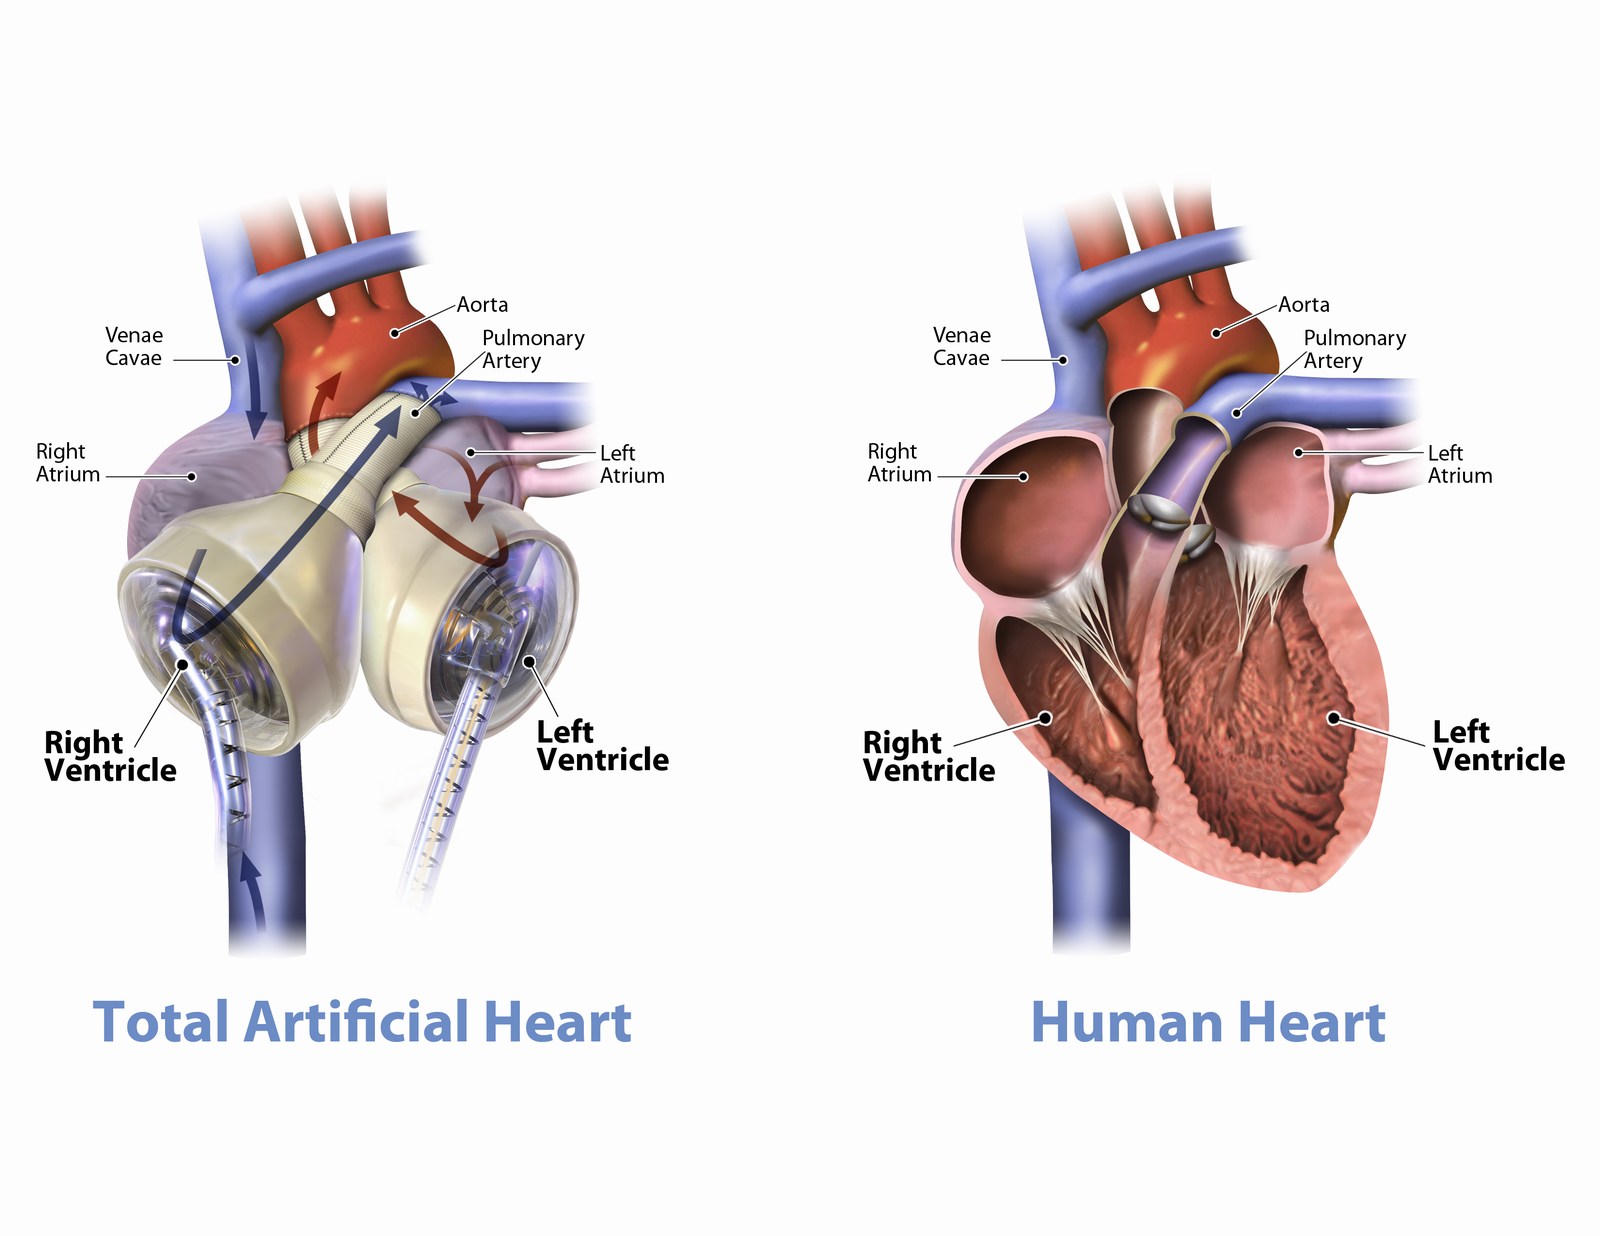 Finland’s First Artificial Heart is Implanted in a Patient – A Rare Treat in the World